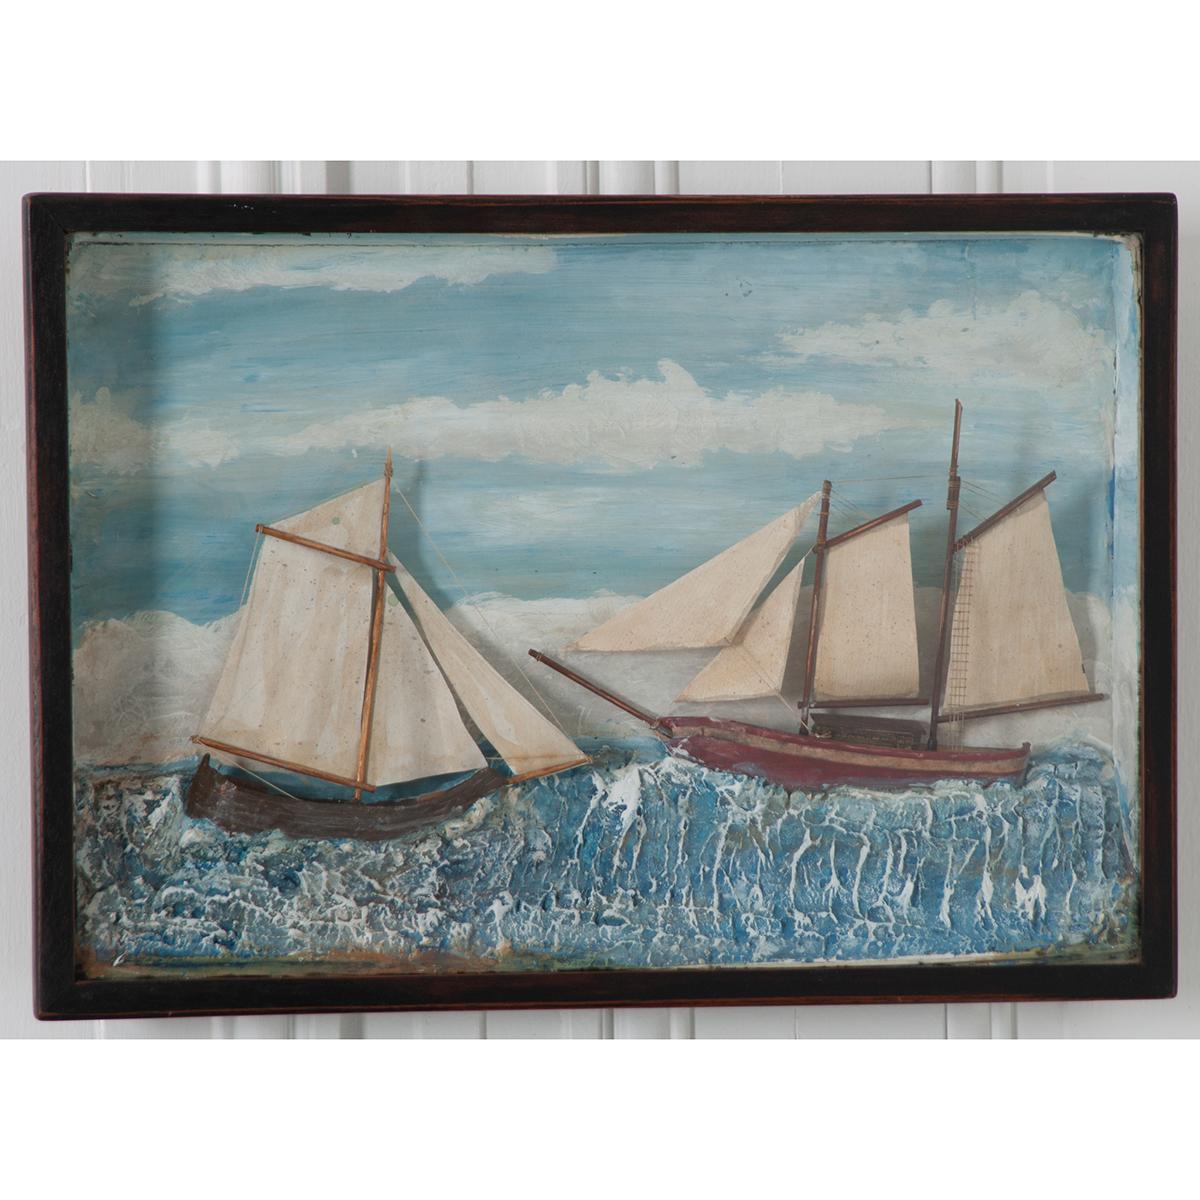 A brilliant English 19th century nautically themed diorama featuring two boats with sails. These three dimensional works of art were typically made by sailors in the 19th century. Note the meticulously detailed sails, masts, ropes, and netting.
 